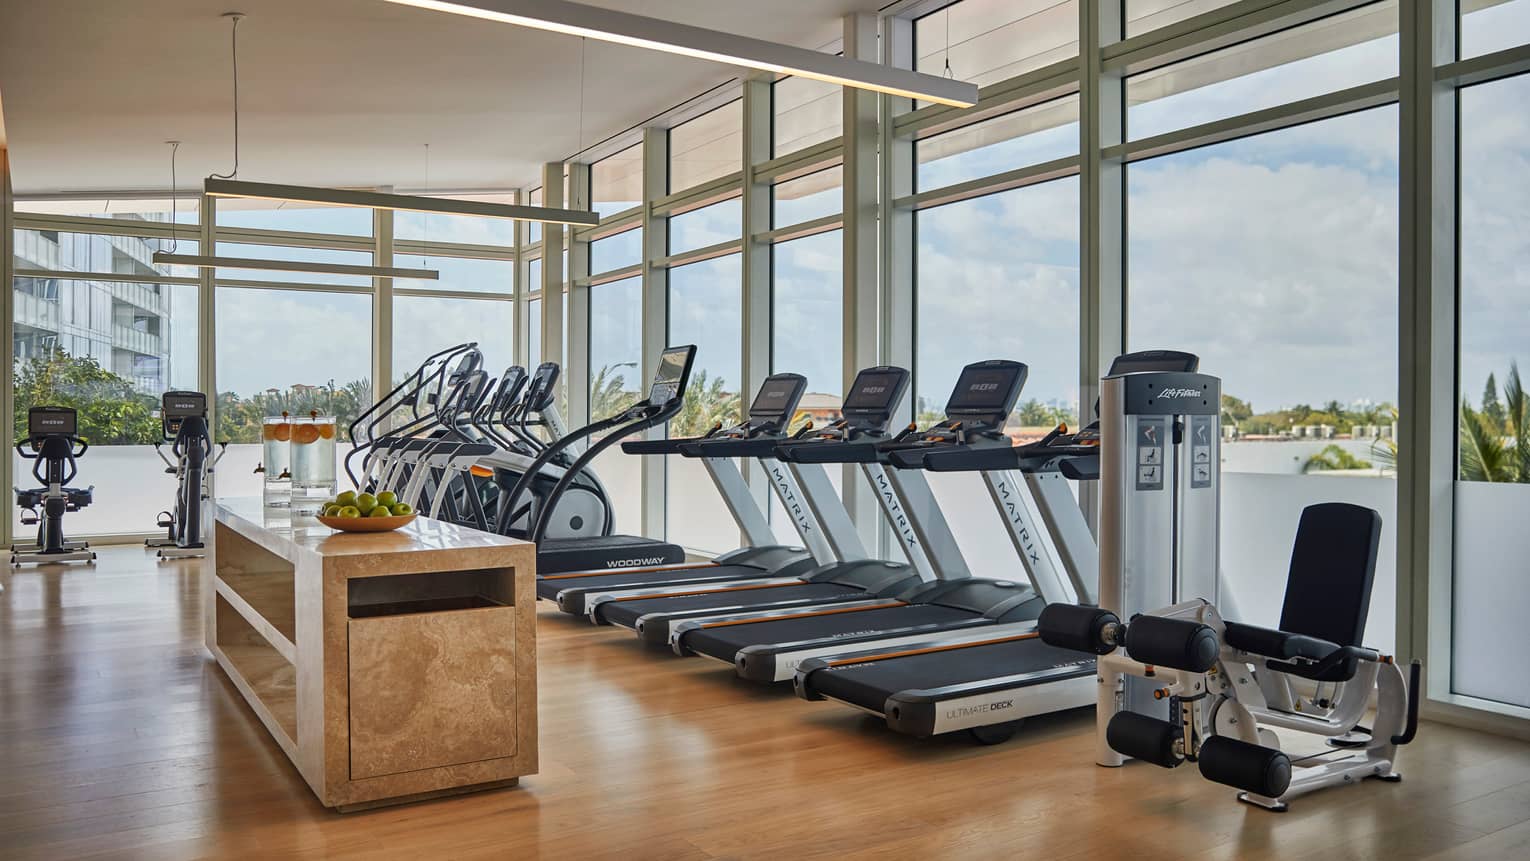 Indoor fitness facility with cardio and strength training equipment like treadmills and elliptical machines